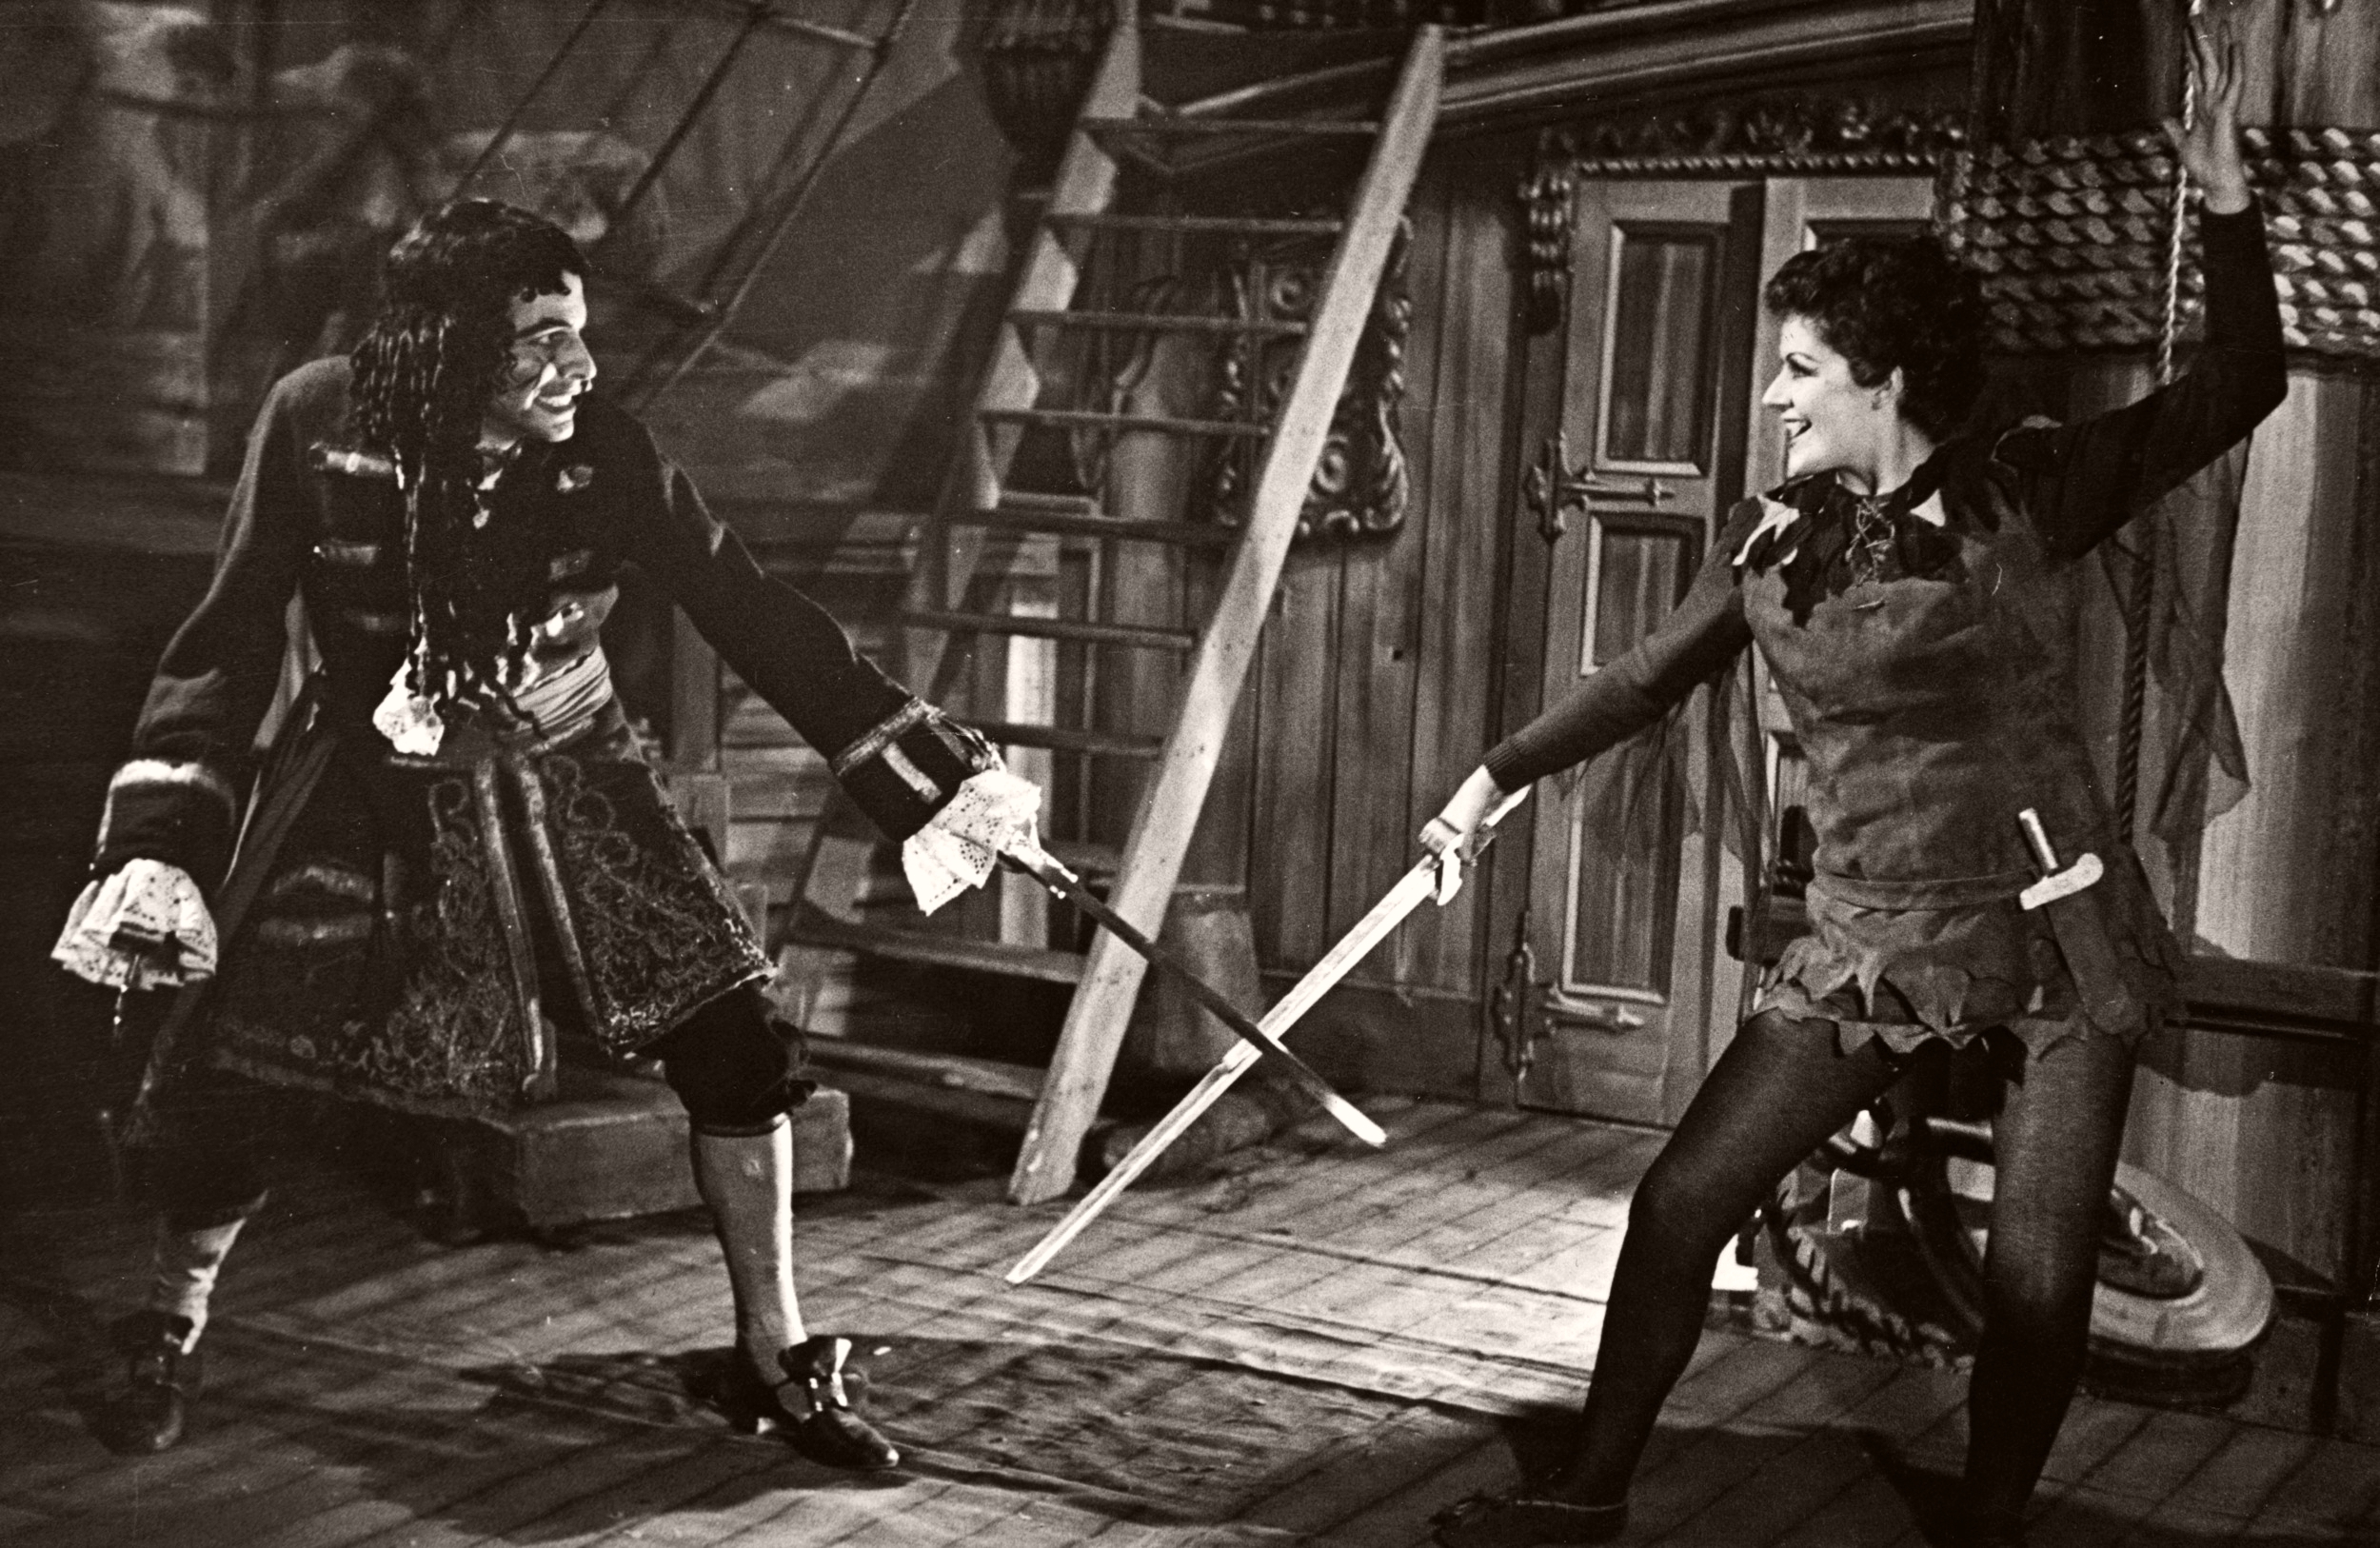 Photograph of John Justin as Capt Hook and Margaret Lockwood as Peter Pan in the Scala Theatre, 1950 production run of Peter Pan